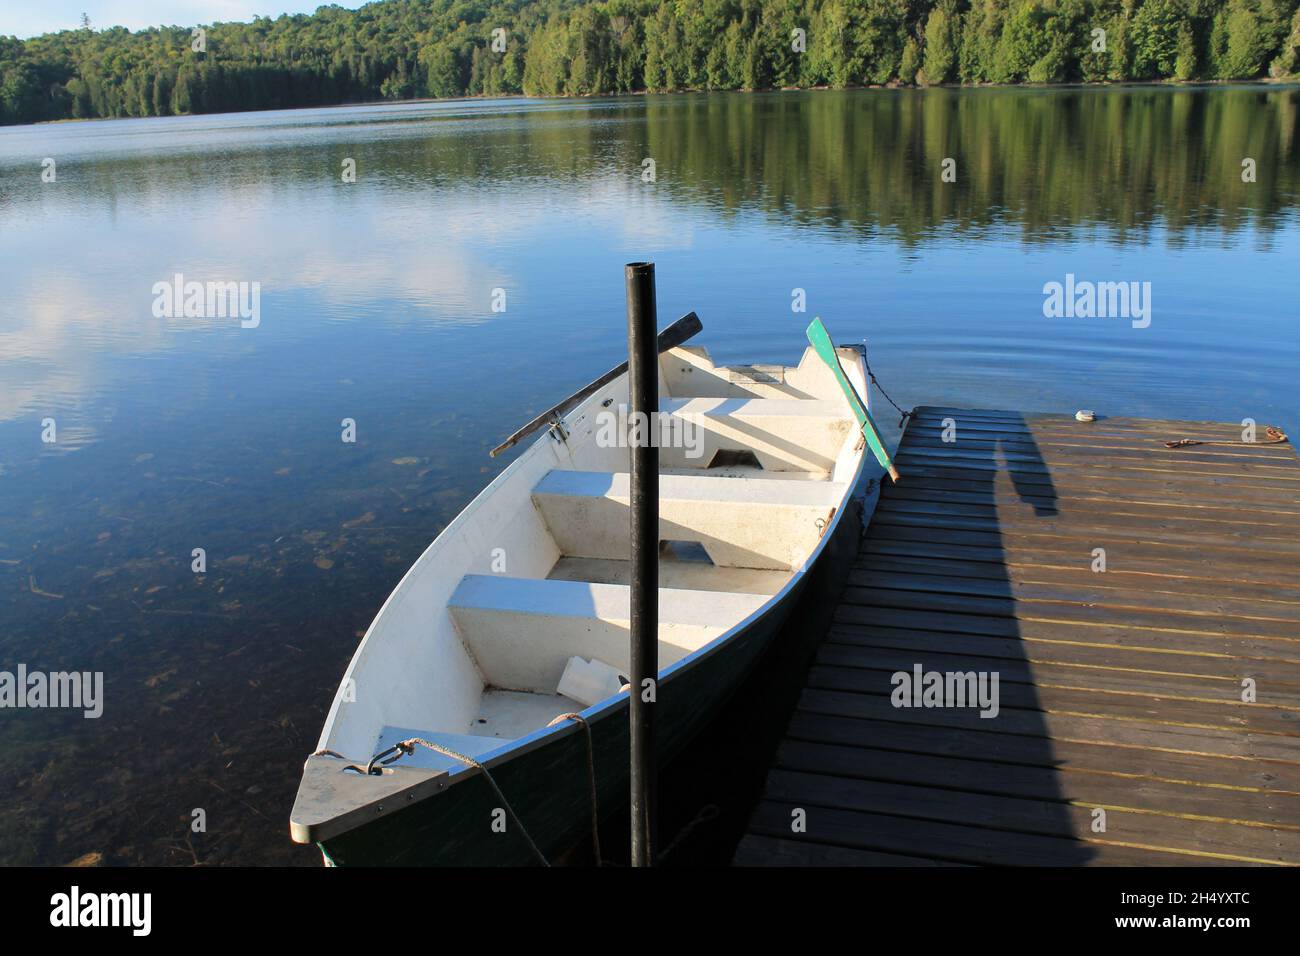 A sailing boat at lake des Ecorces in Quebec Canada. The calmness of the water, an amazing view of trees. Stock Photo